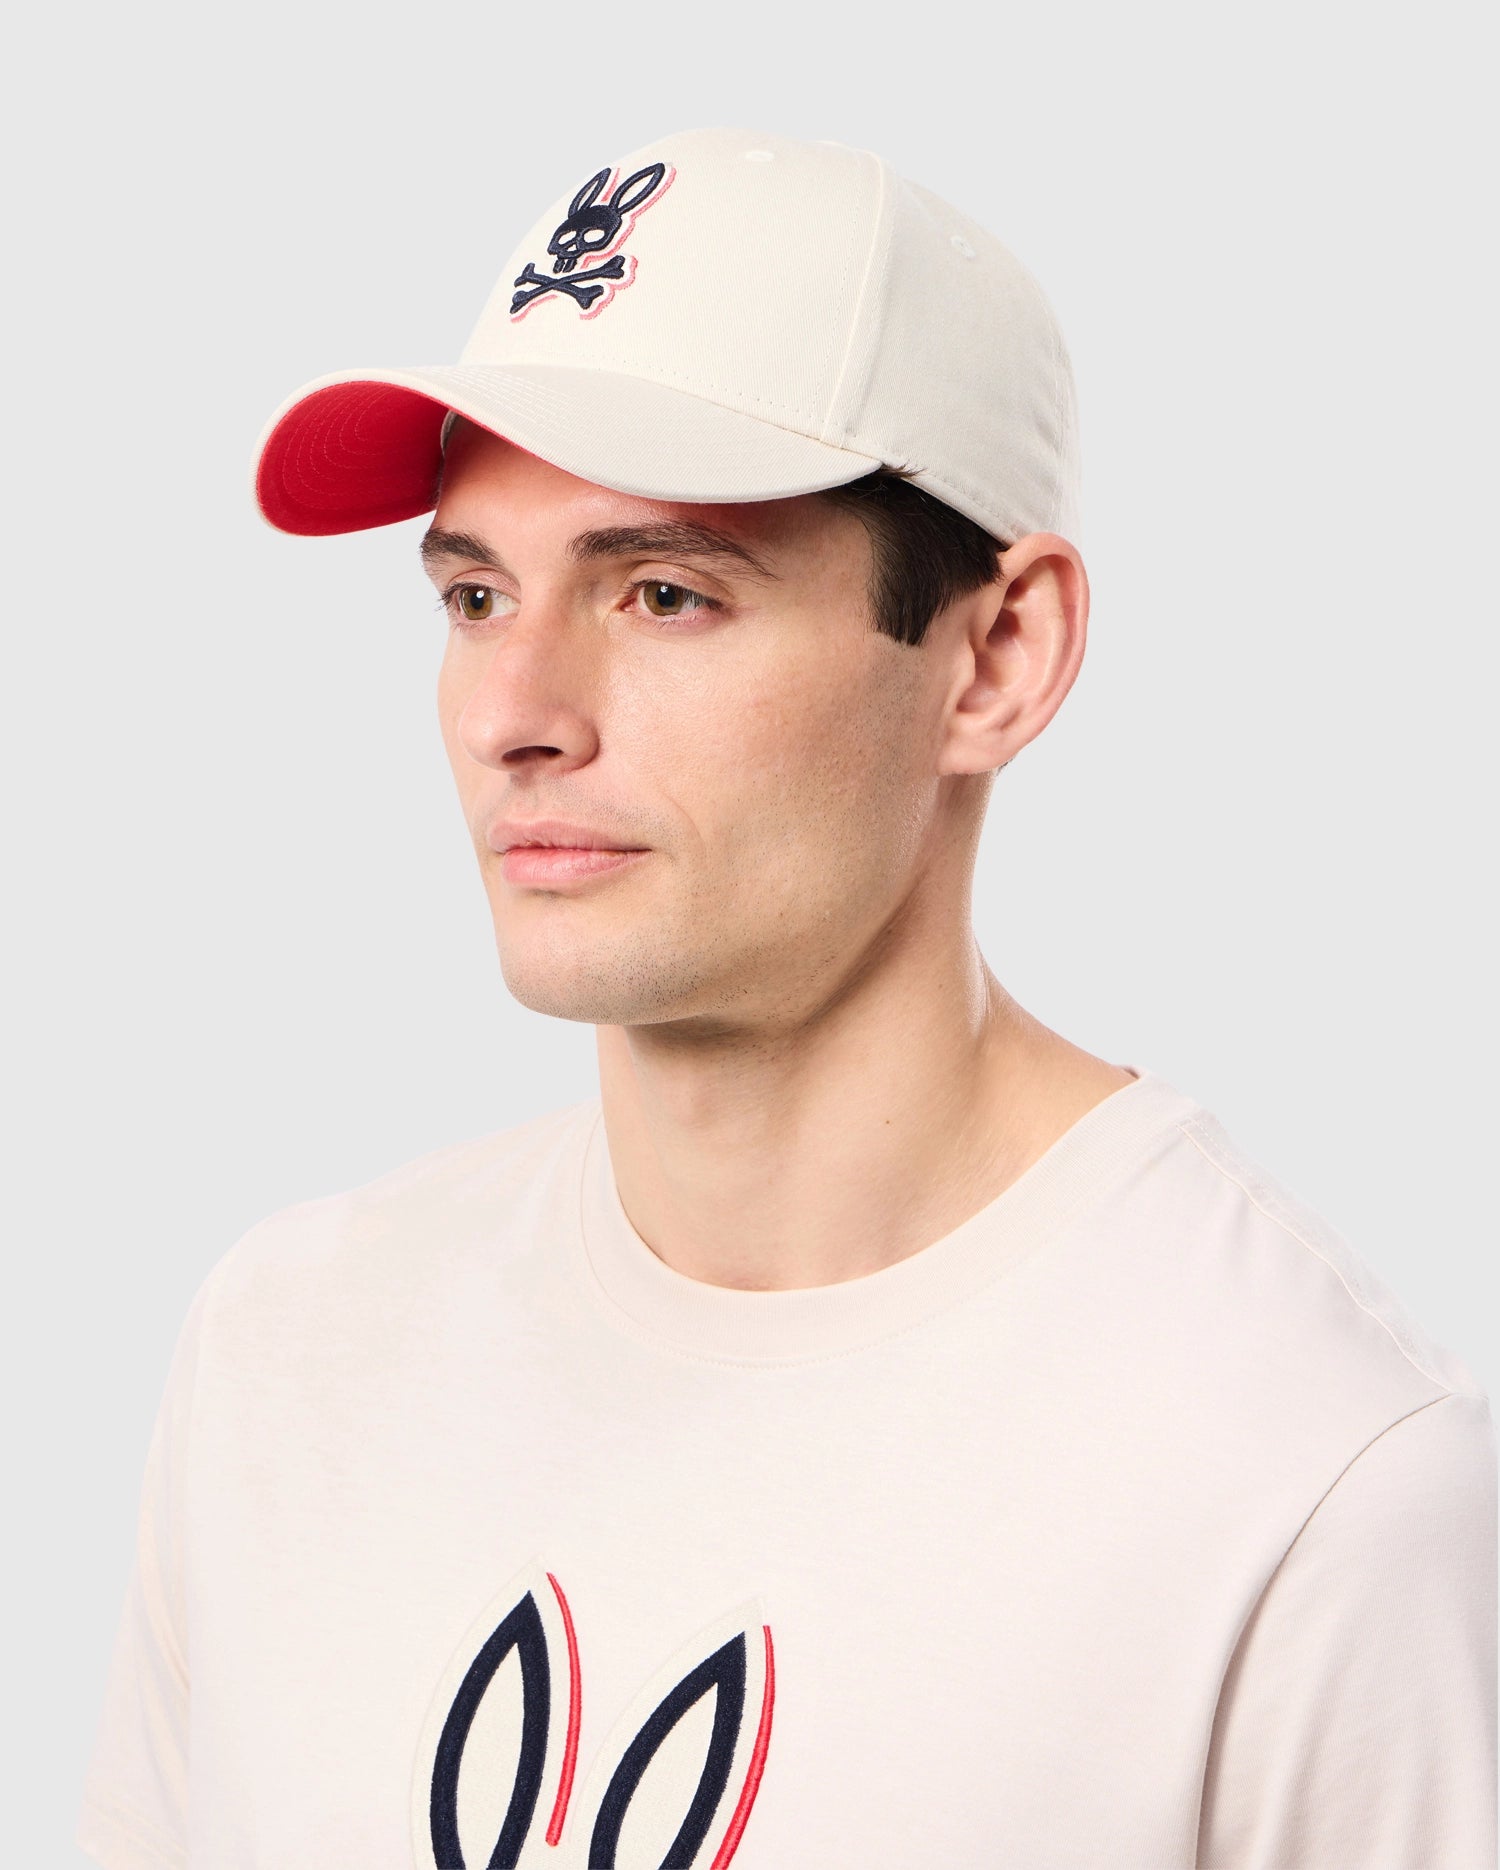 A man is wearing a white MENS KAYDEN BASEBALL CAP - B6A677C200 from Psycho Bunny, featuring an embroidered Bunny logo with a black and white rabbit skull on the front. He is dressed in a matching white T-shirt with the same design. The durable cotton twill cap stands out against the plain, light gray background.